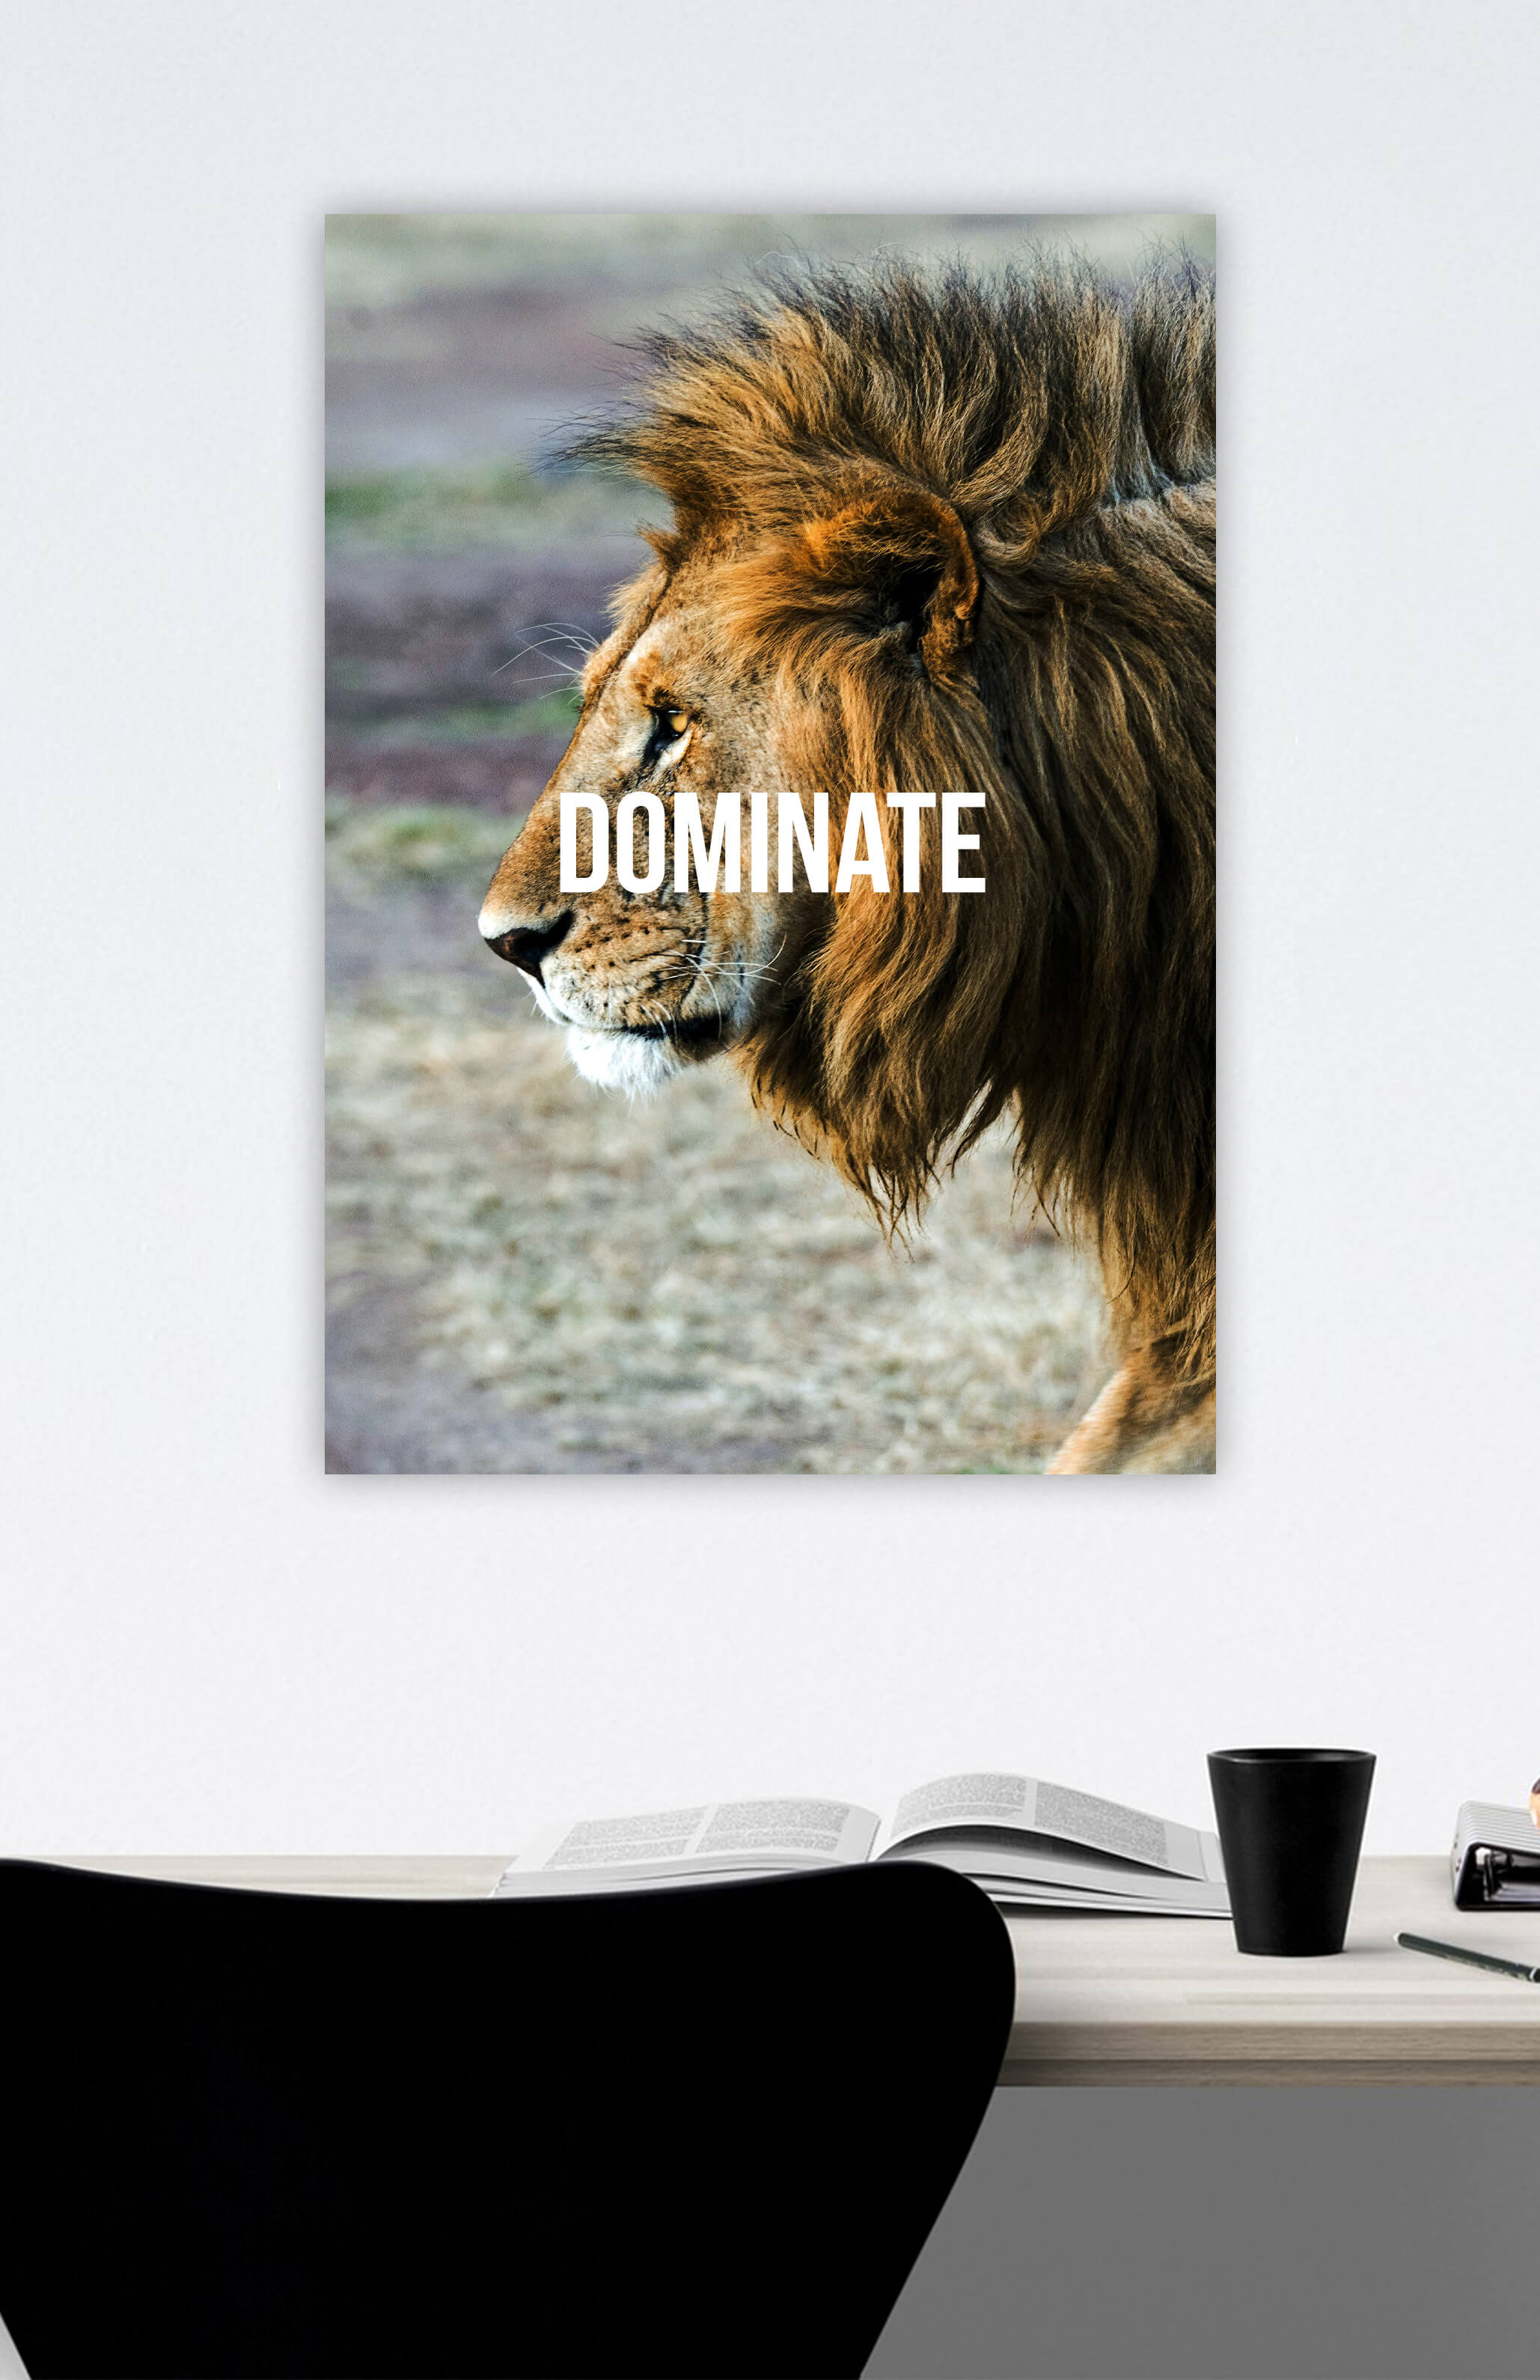 redbaysand womens Dominate, Motivational posters, mens inspirational wall artwork and empowering poster quote designs for office, home gym, school, kitchen and living room.